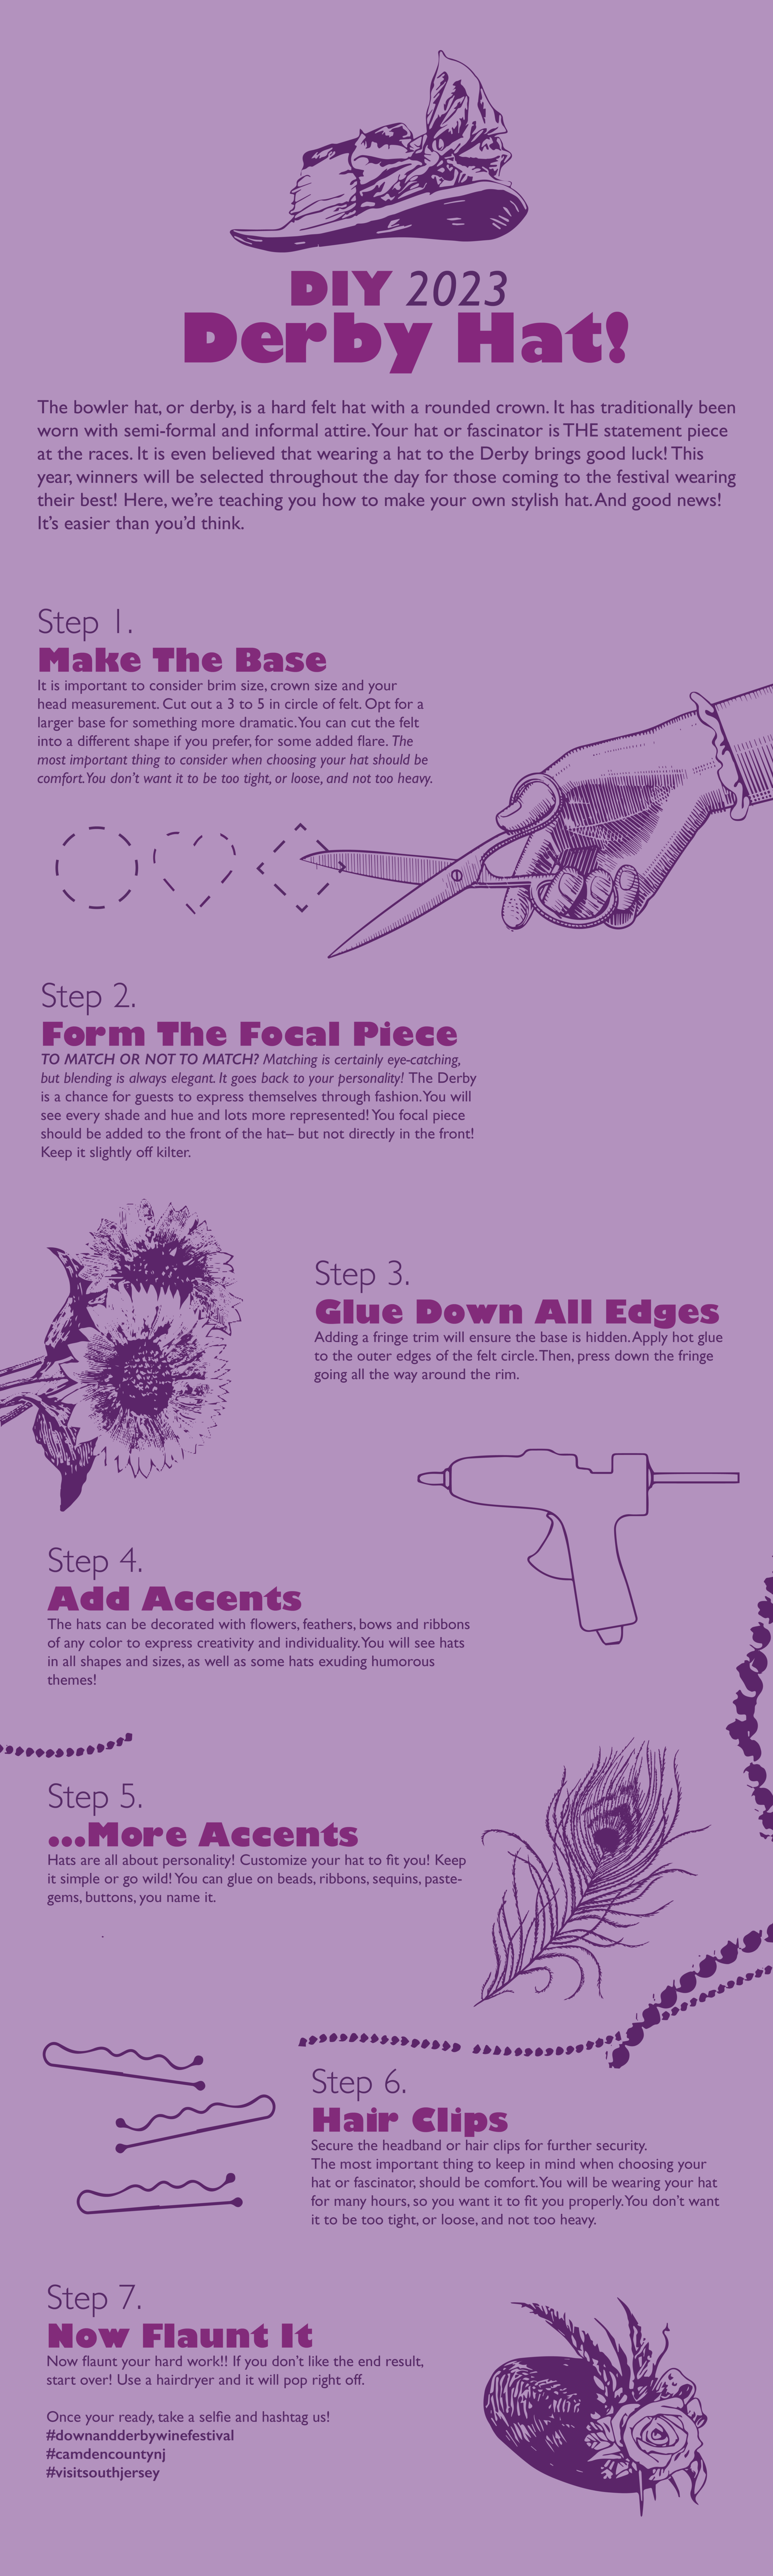 How to Make Your Own Derby Hat: An Easy Guide